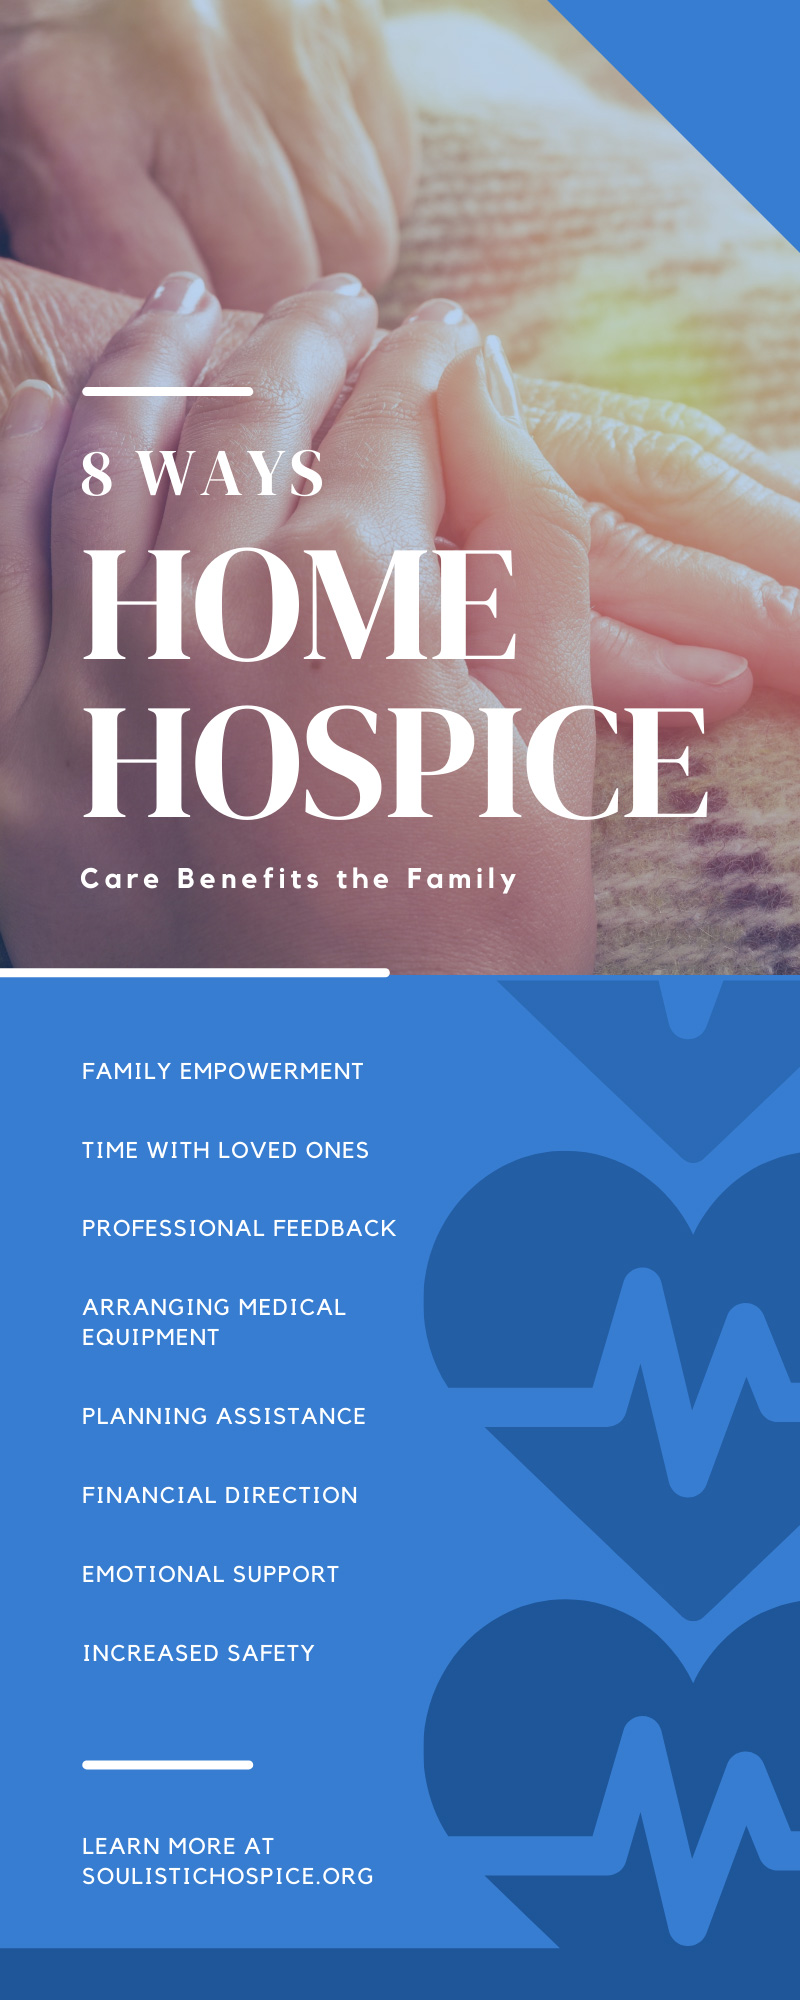 8 Ways Home Hospice Care Benefits the Family